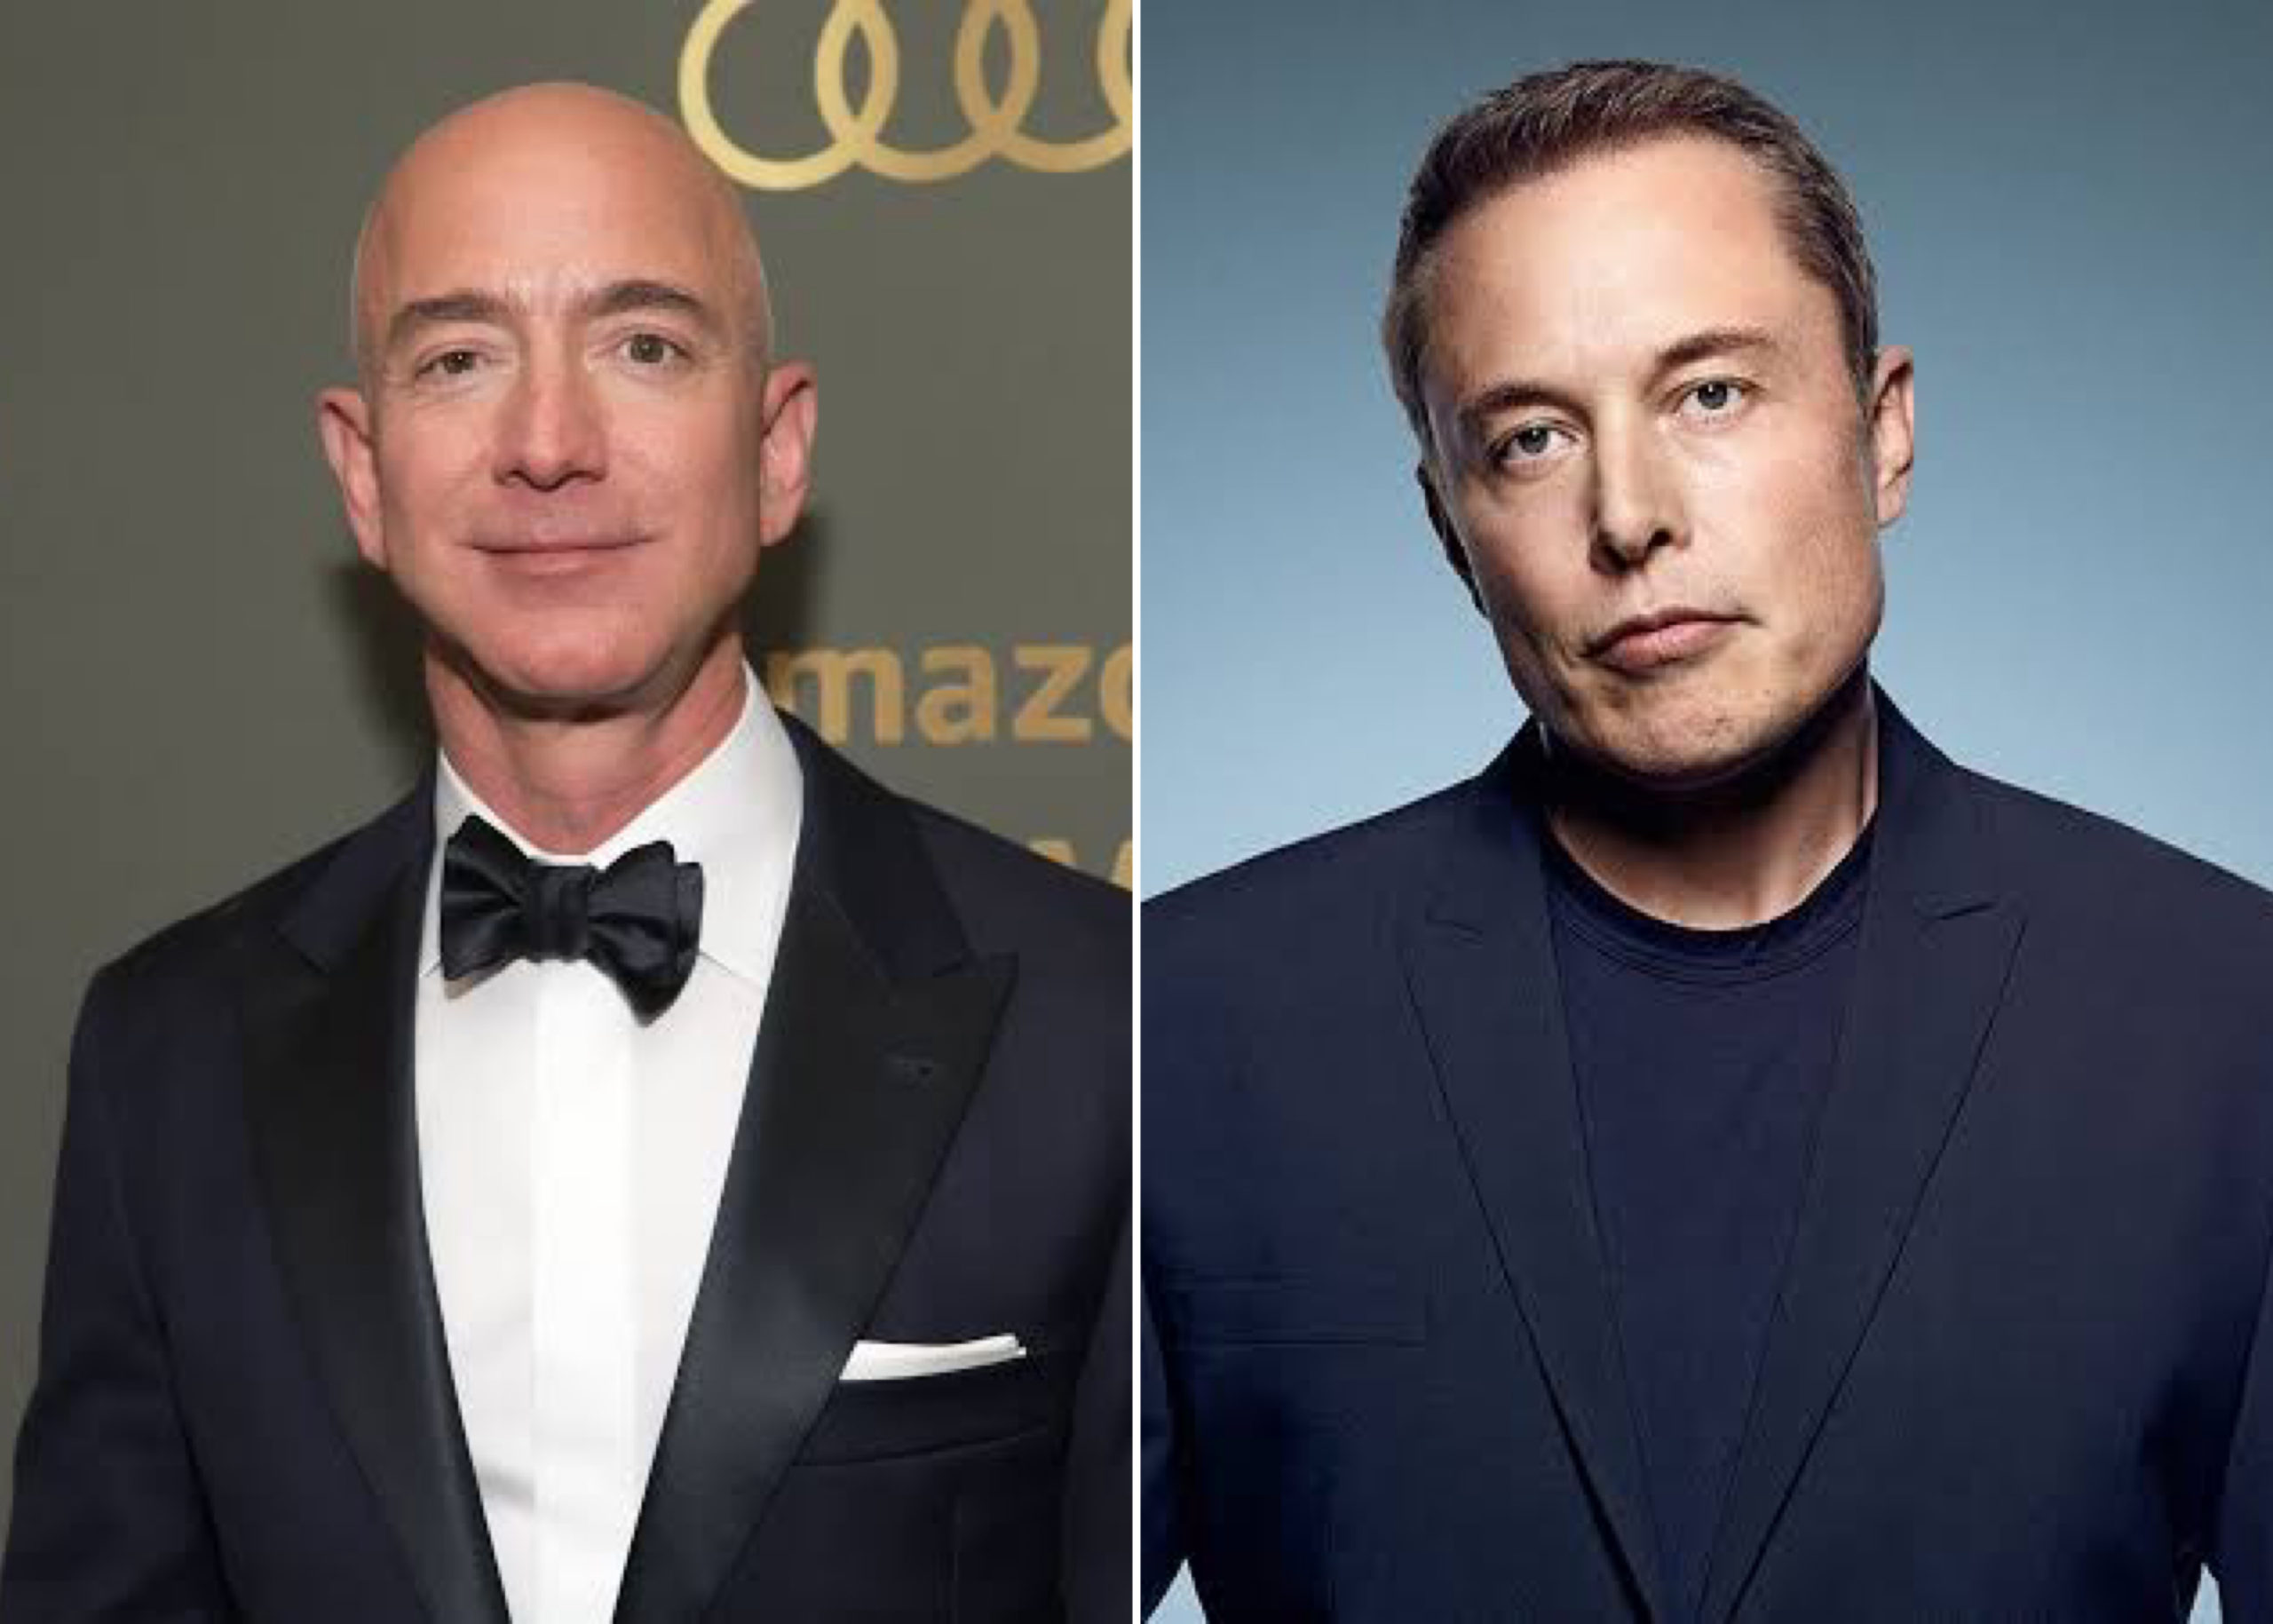 Jeff Bezos Overtakes Elon Musk to Reclaim Spot as World’s Richest Person